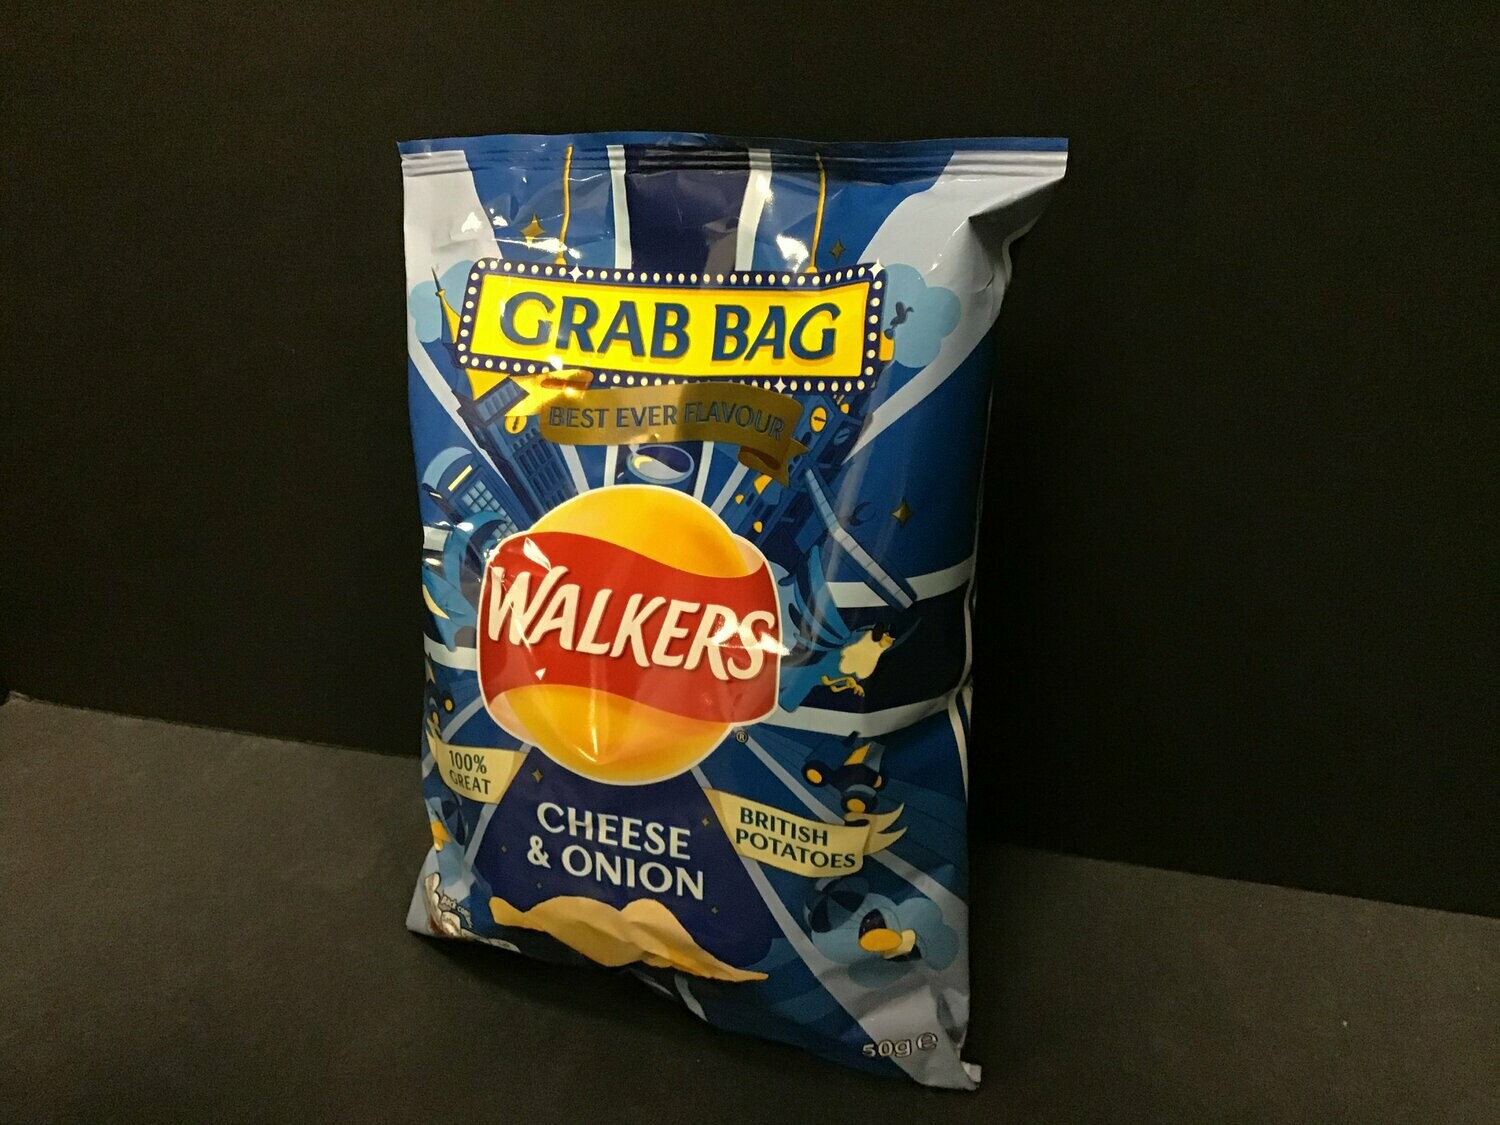 Walkers Cheese & Onion 32.5g